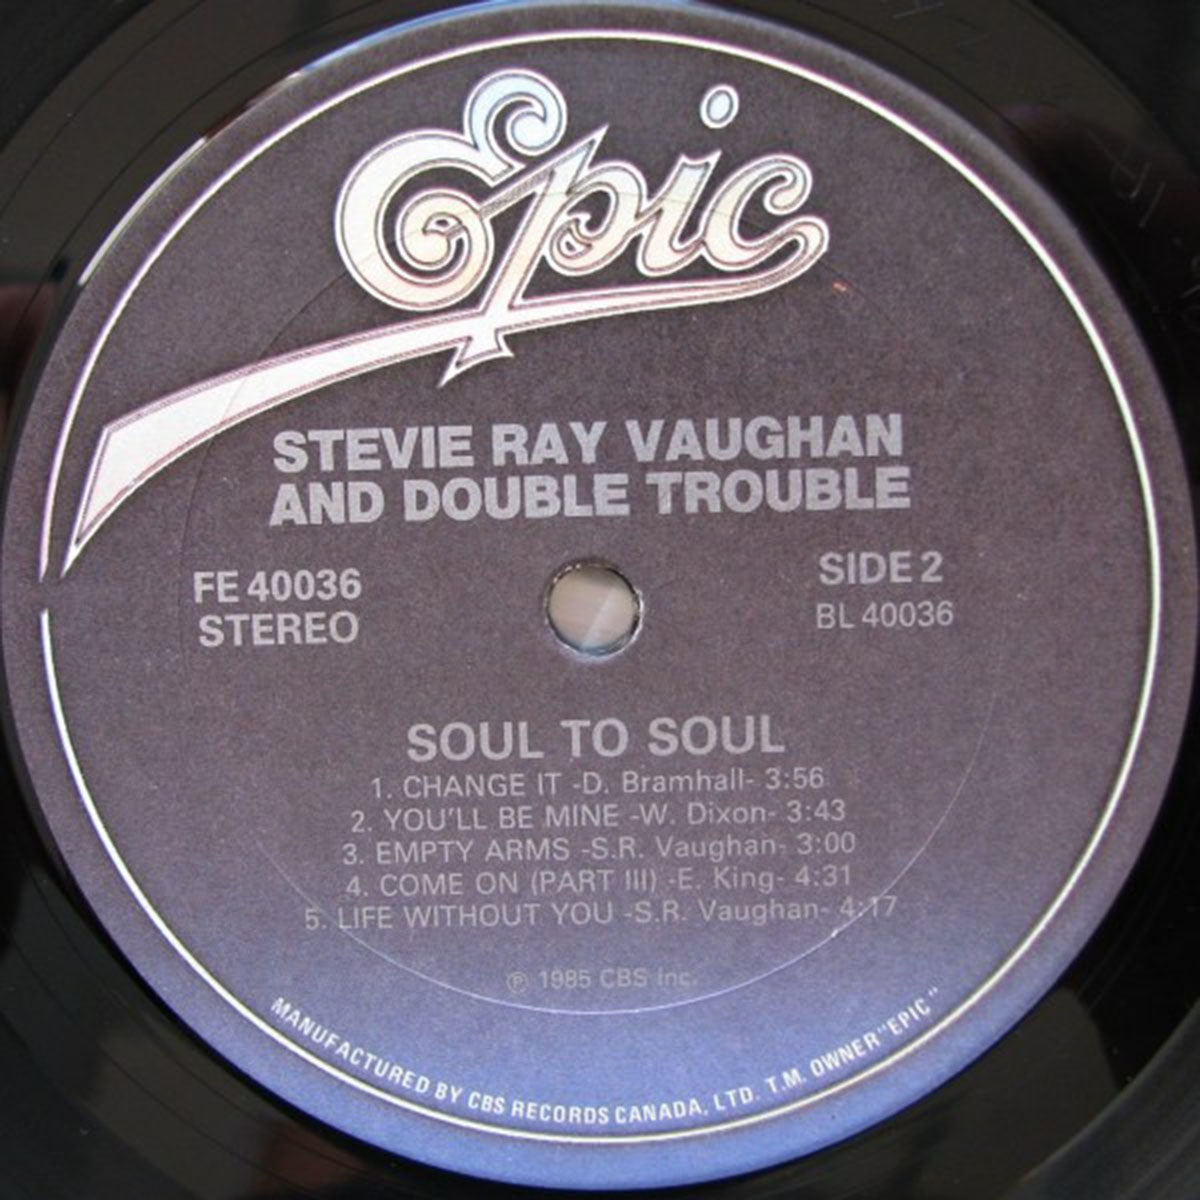 Stevie Ray Vaughan And Double Trouble – Soul To Soul - 1985 Pressing